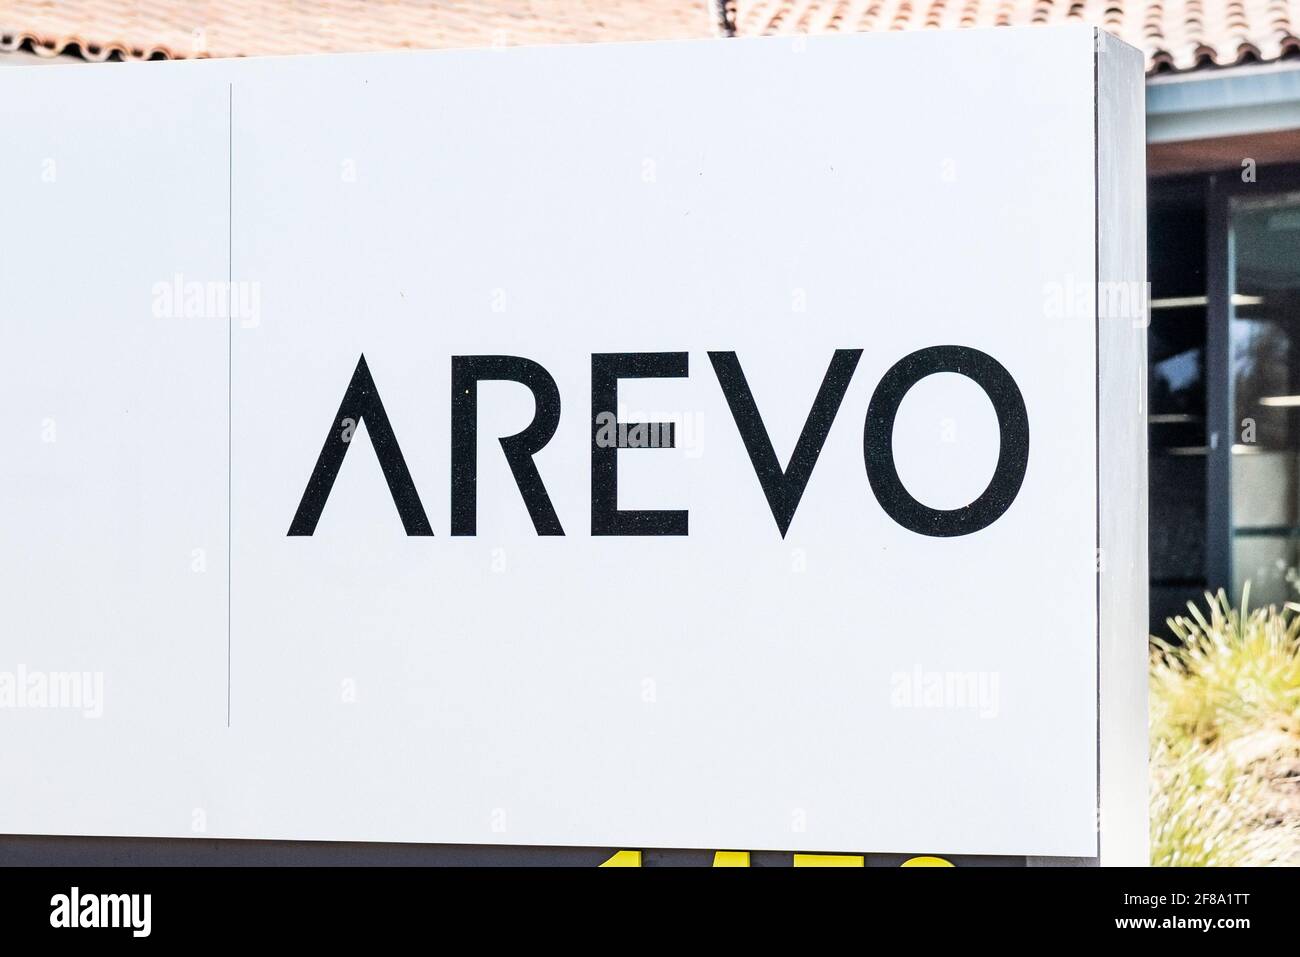 Sep 24, 2020 Milpitas / CA / USA - Arevo logo at their headquarters in Silicon Valley; Arevo, Inc. develops 3D printing technology Stock Photo